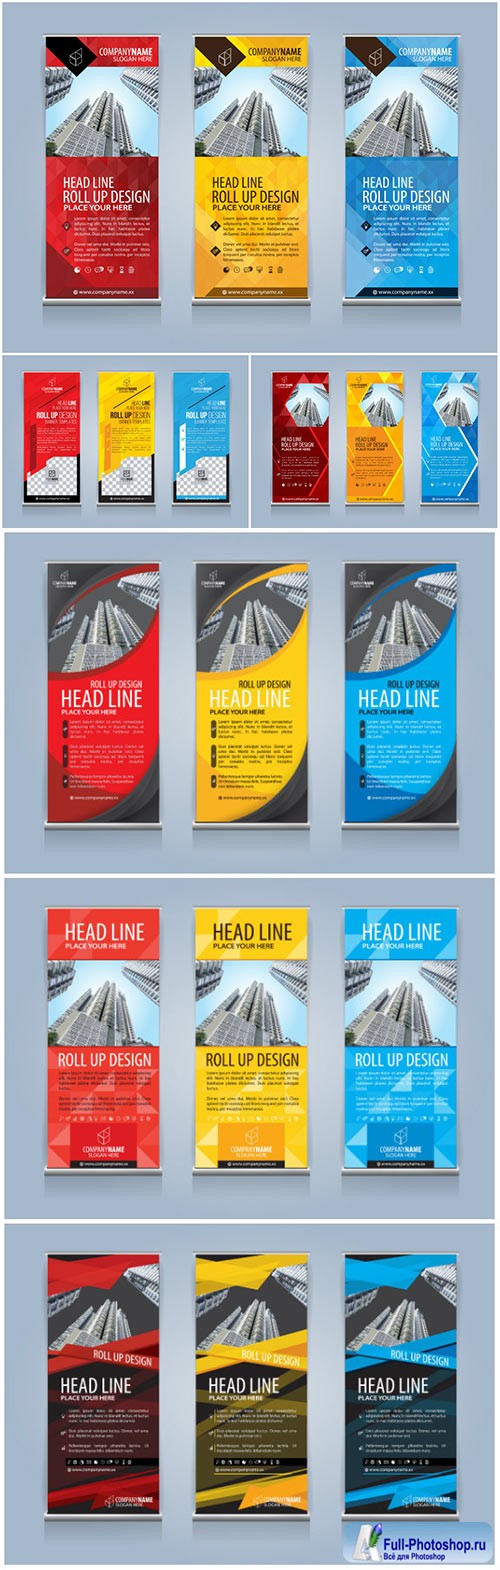 Roll-up design vector template